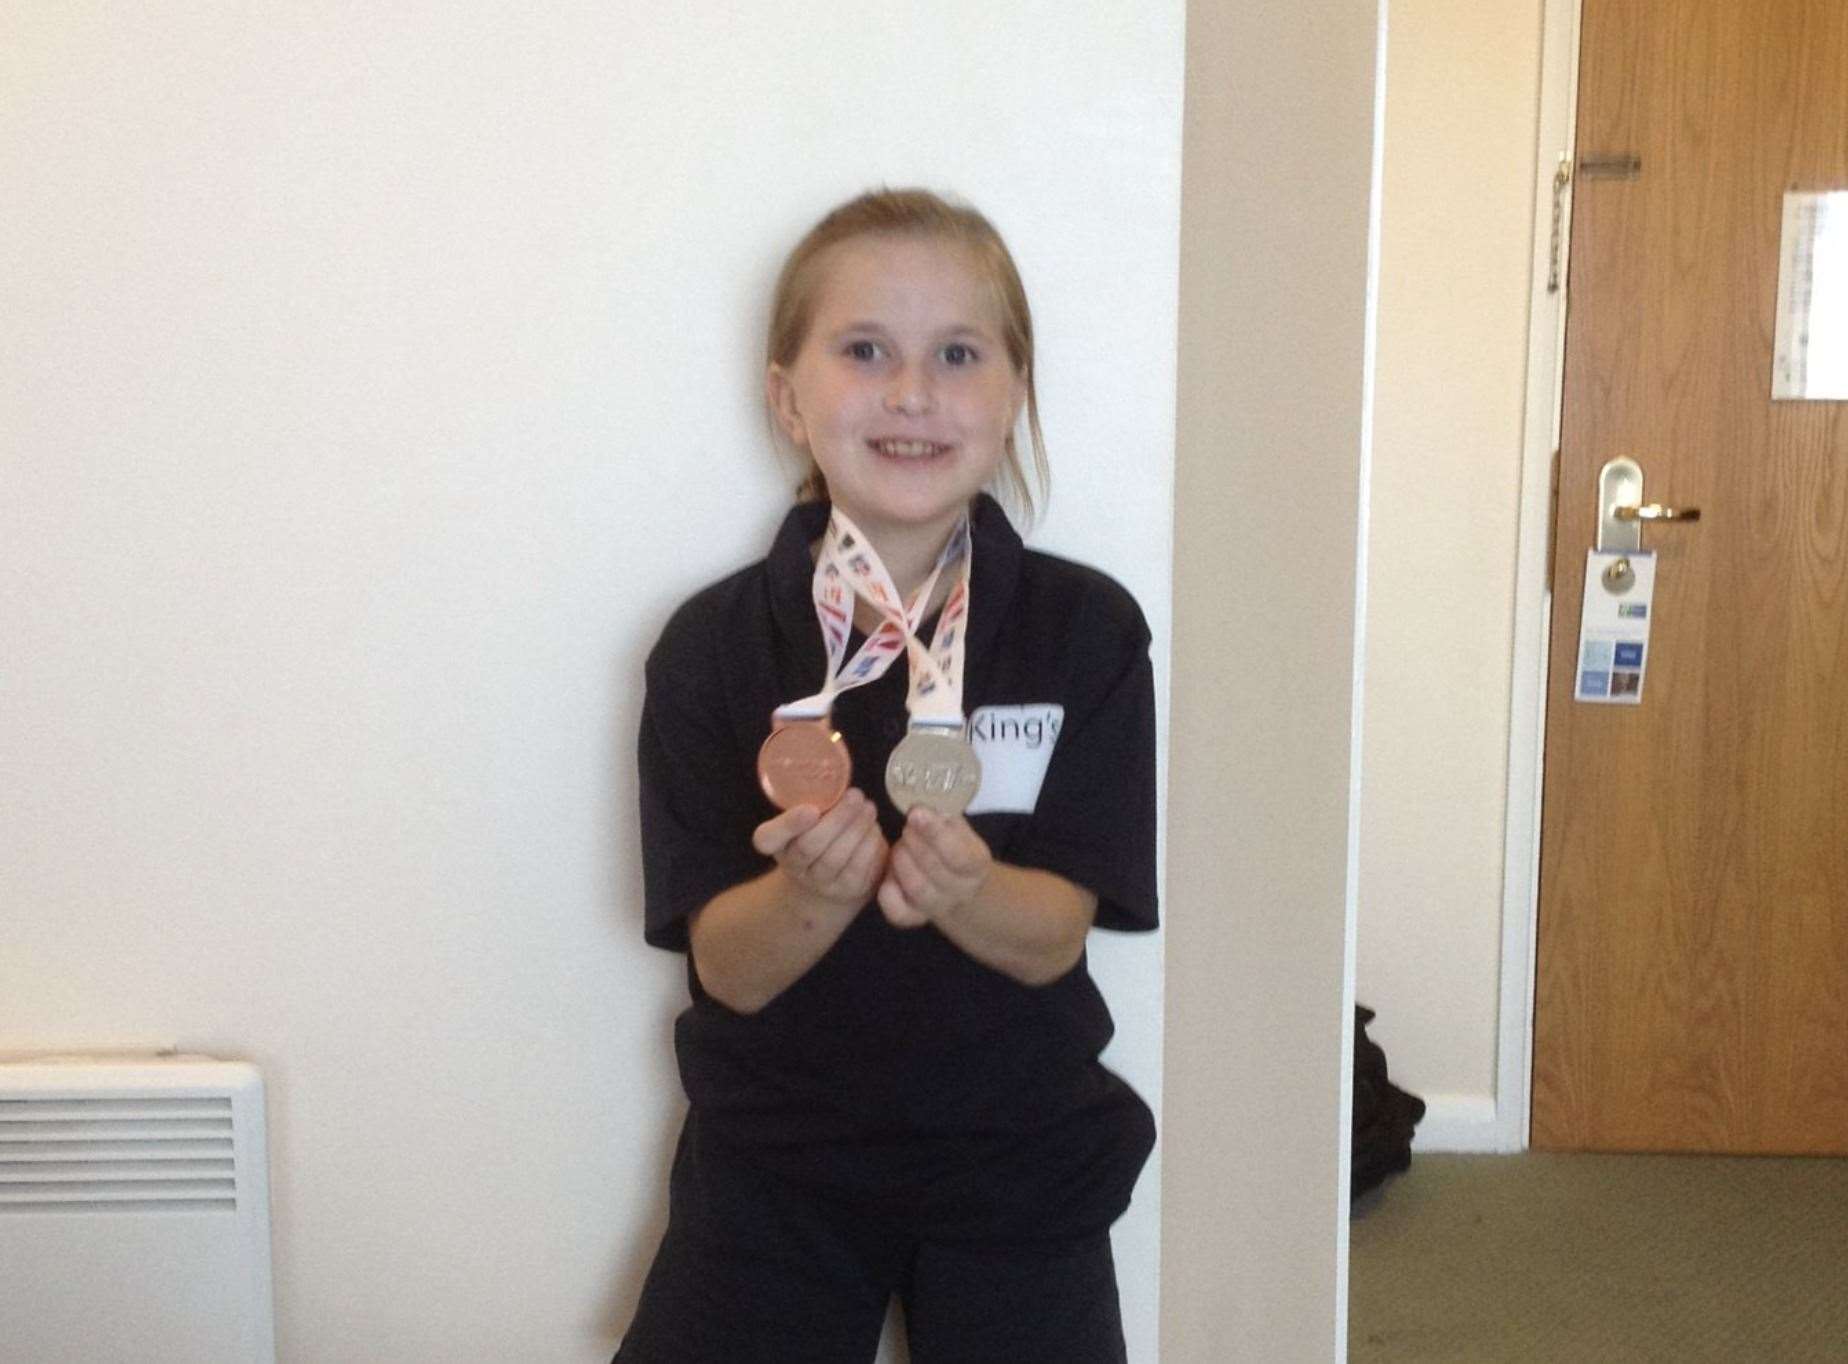 Lilly Beckett, from Margate, won two medals at her first transplant games in 2016